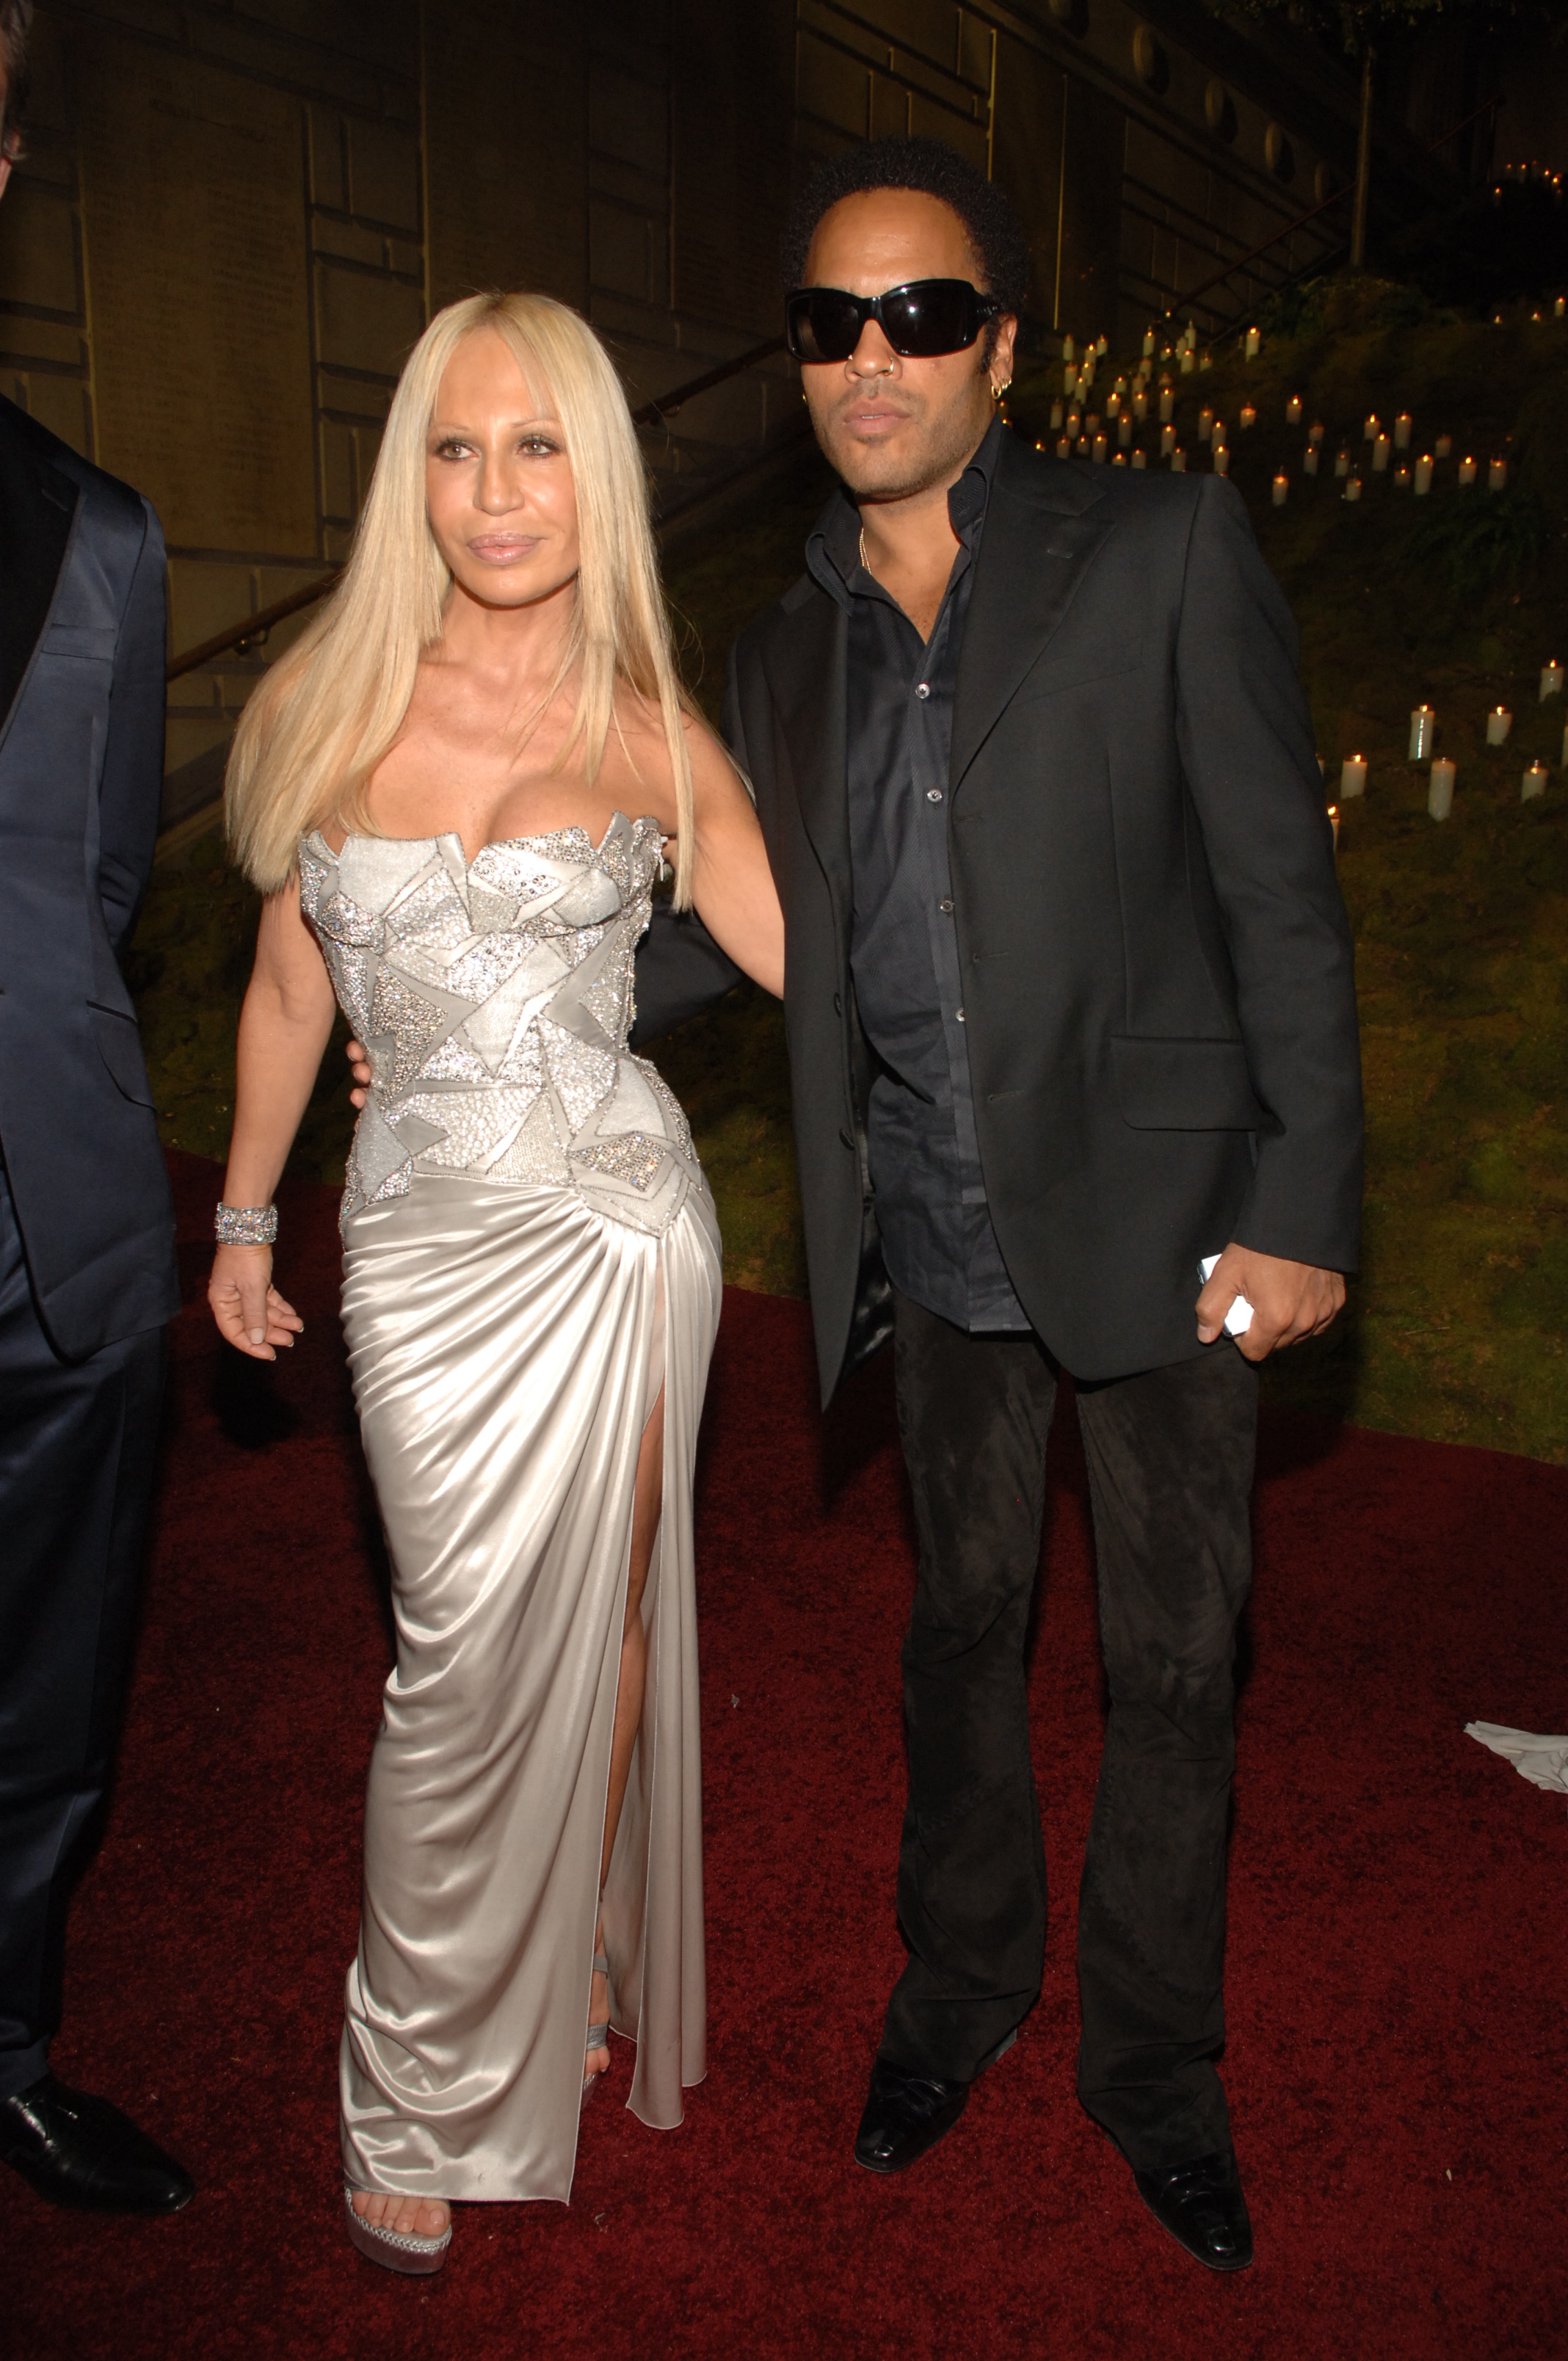 Two celebrities on red carpet, woman in embellished silver gown with slit, man in black suit and sunglasses